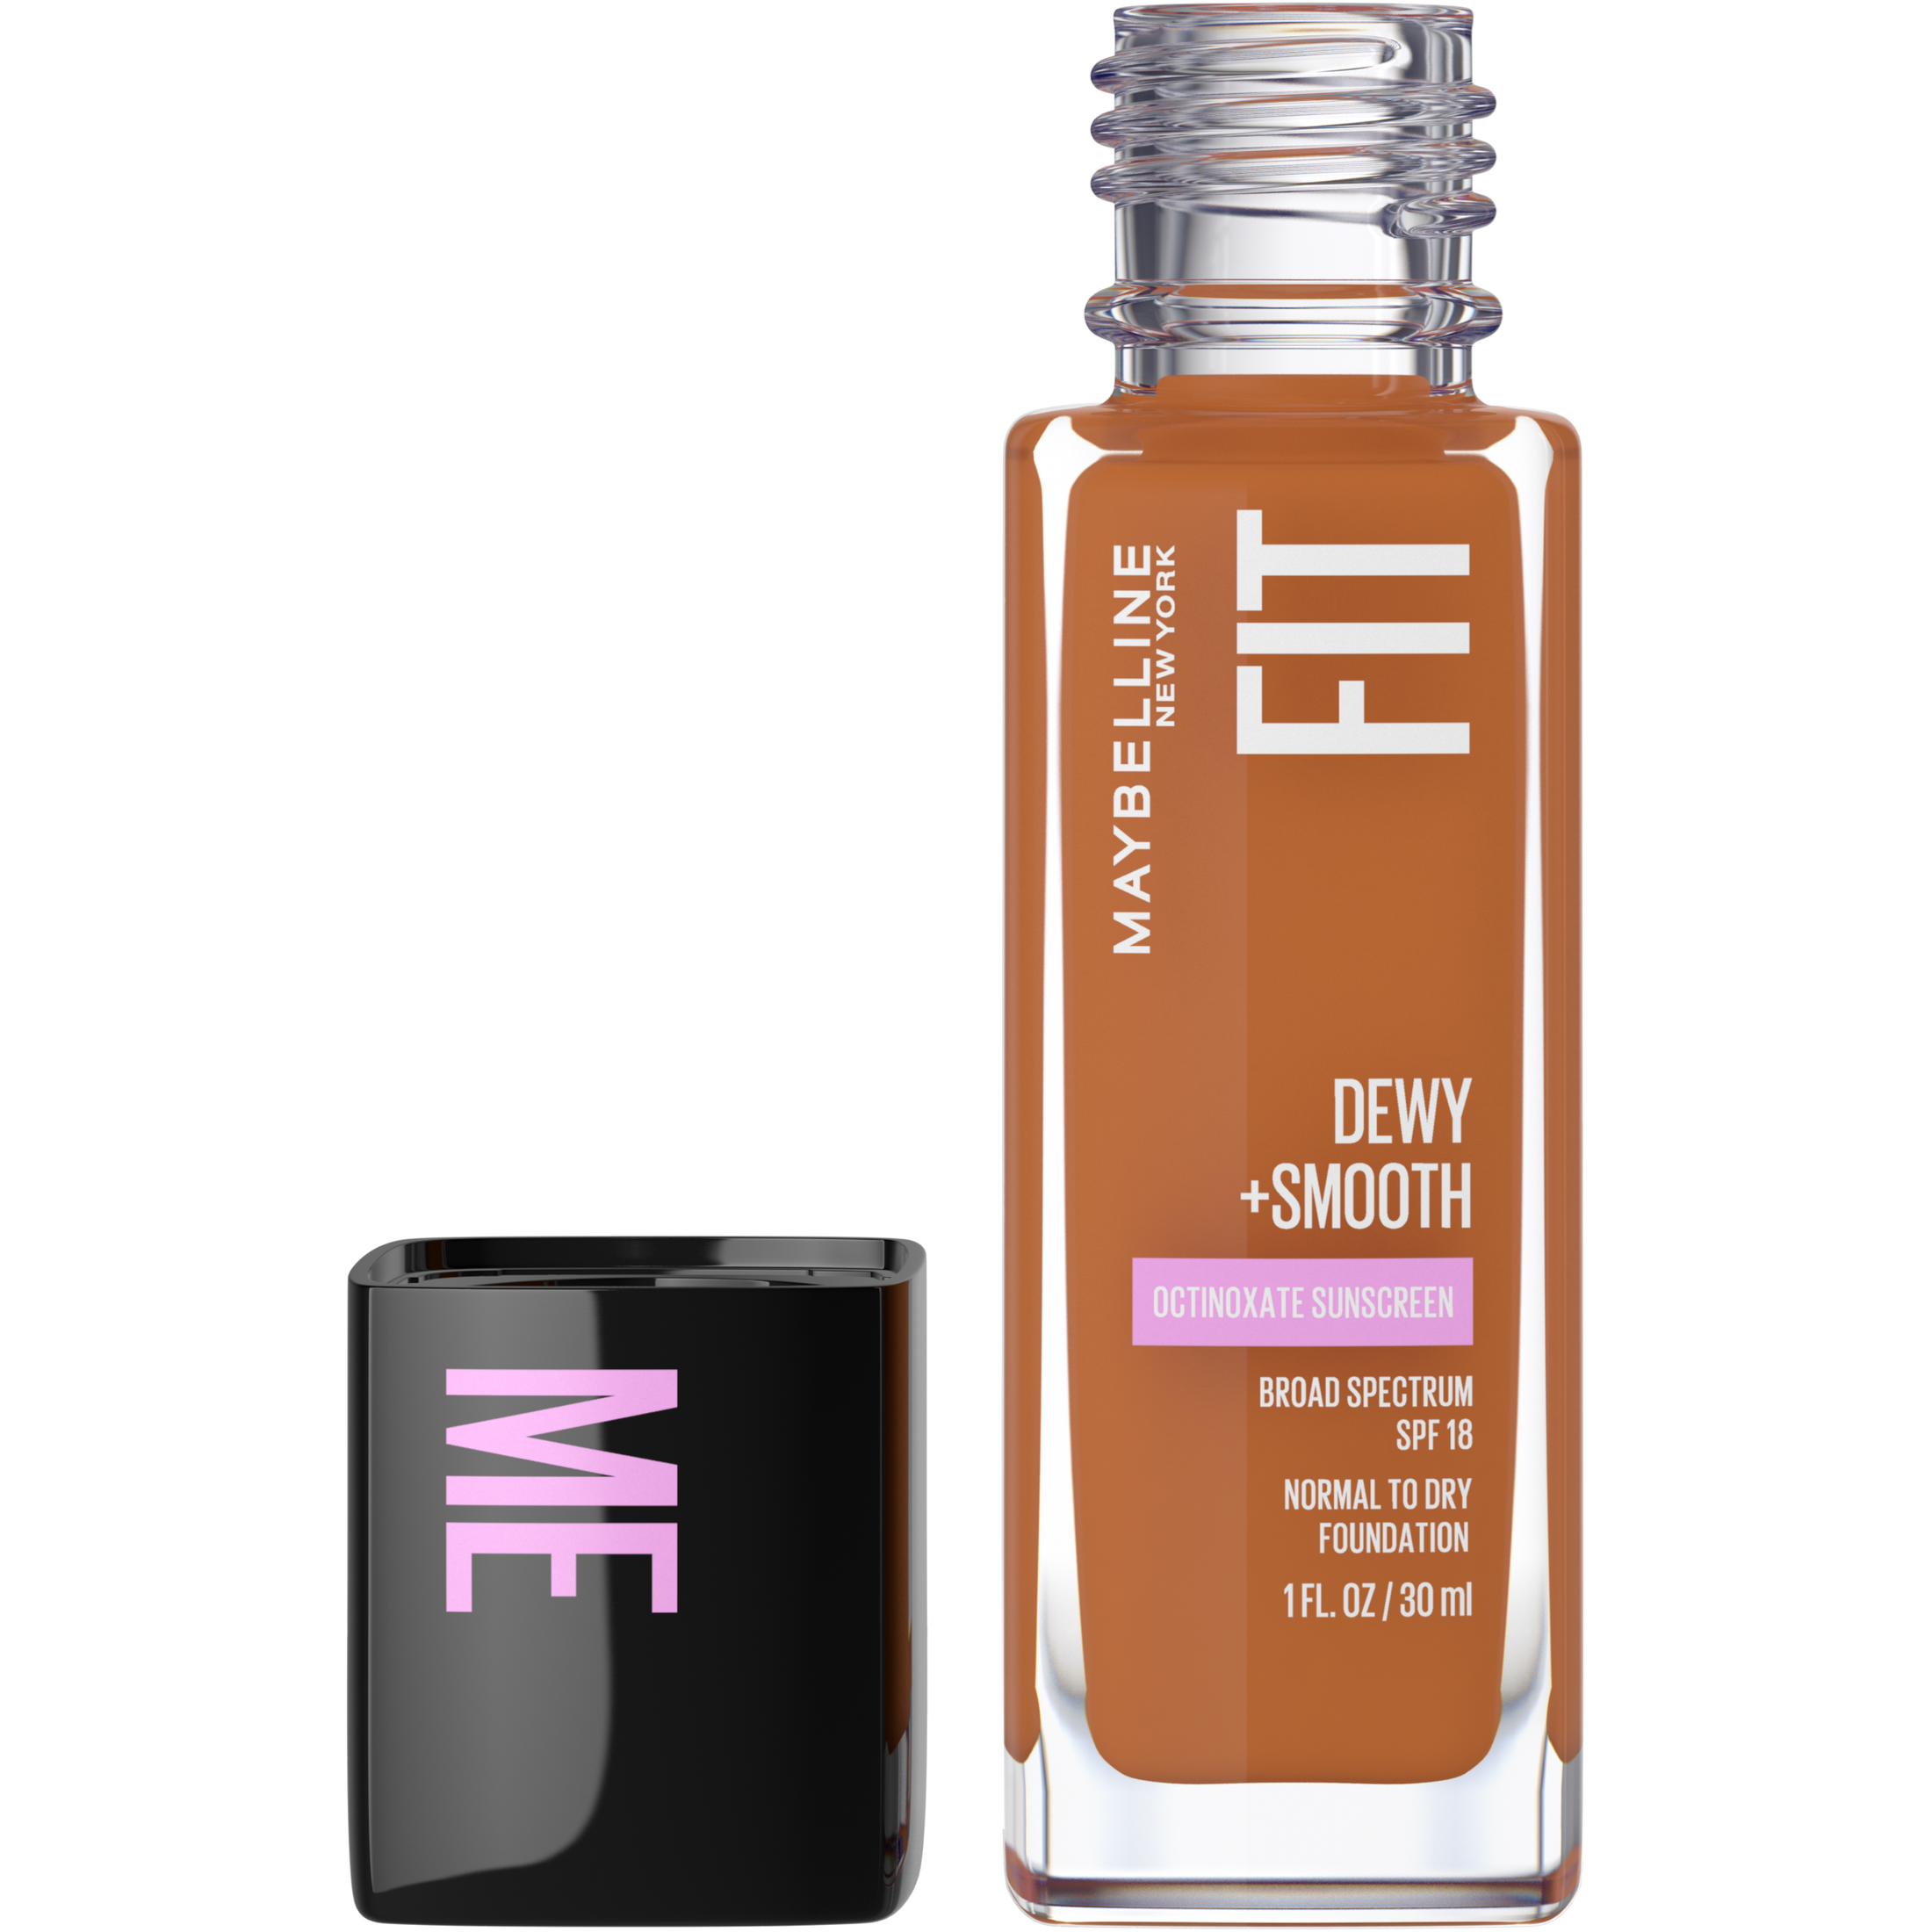 Maybelline Fit Me Dewy and Smooth Liquid Foundation Makeup, SPF 18, Mocha, 1 fl oz - image 1 of 9